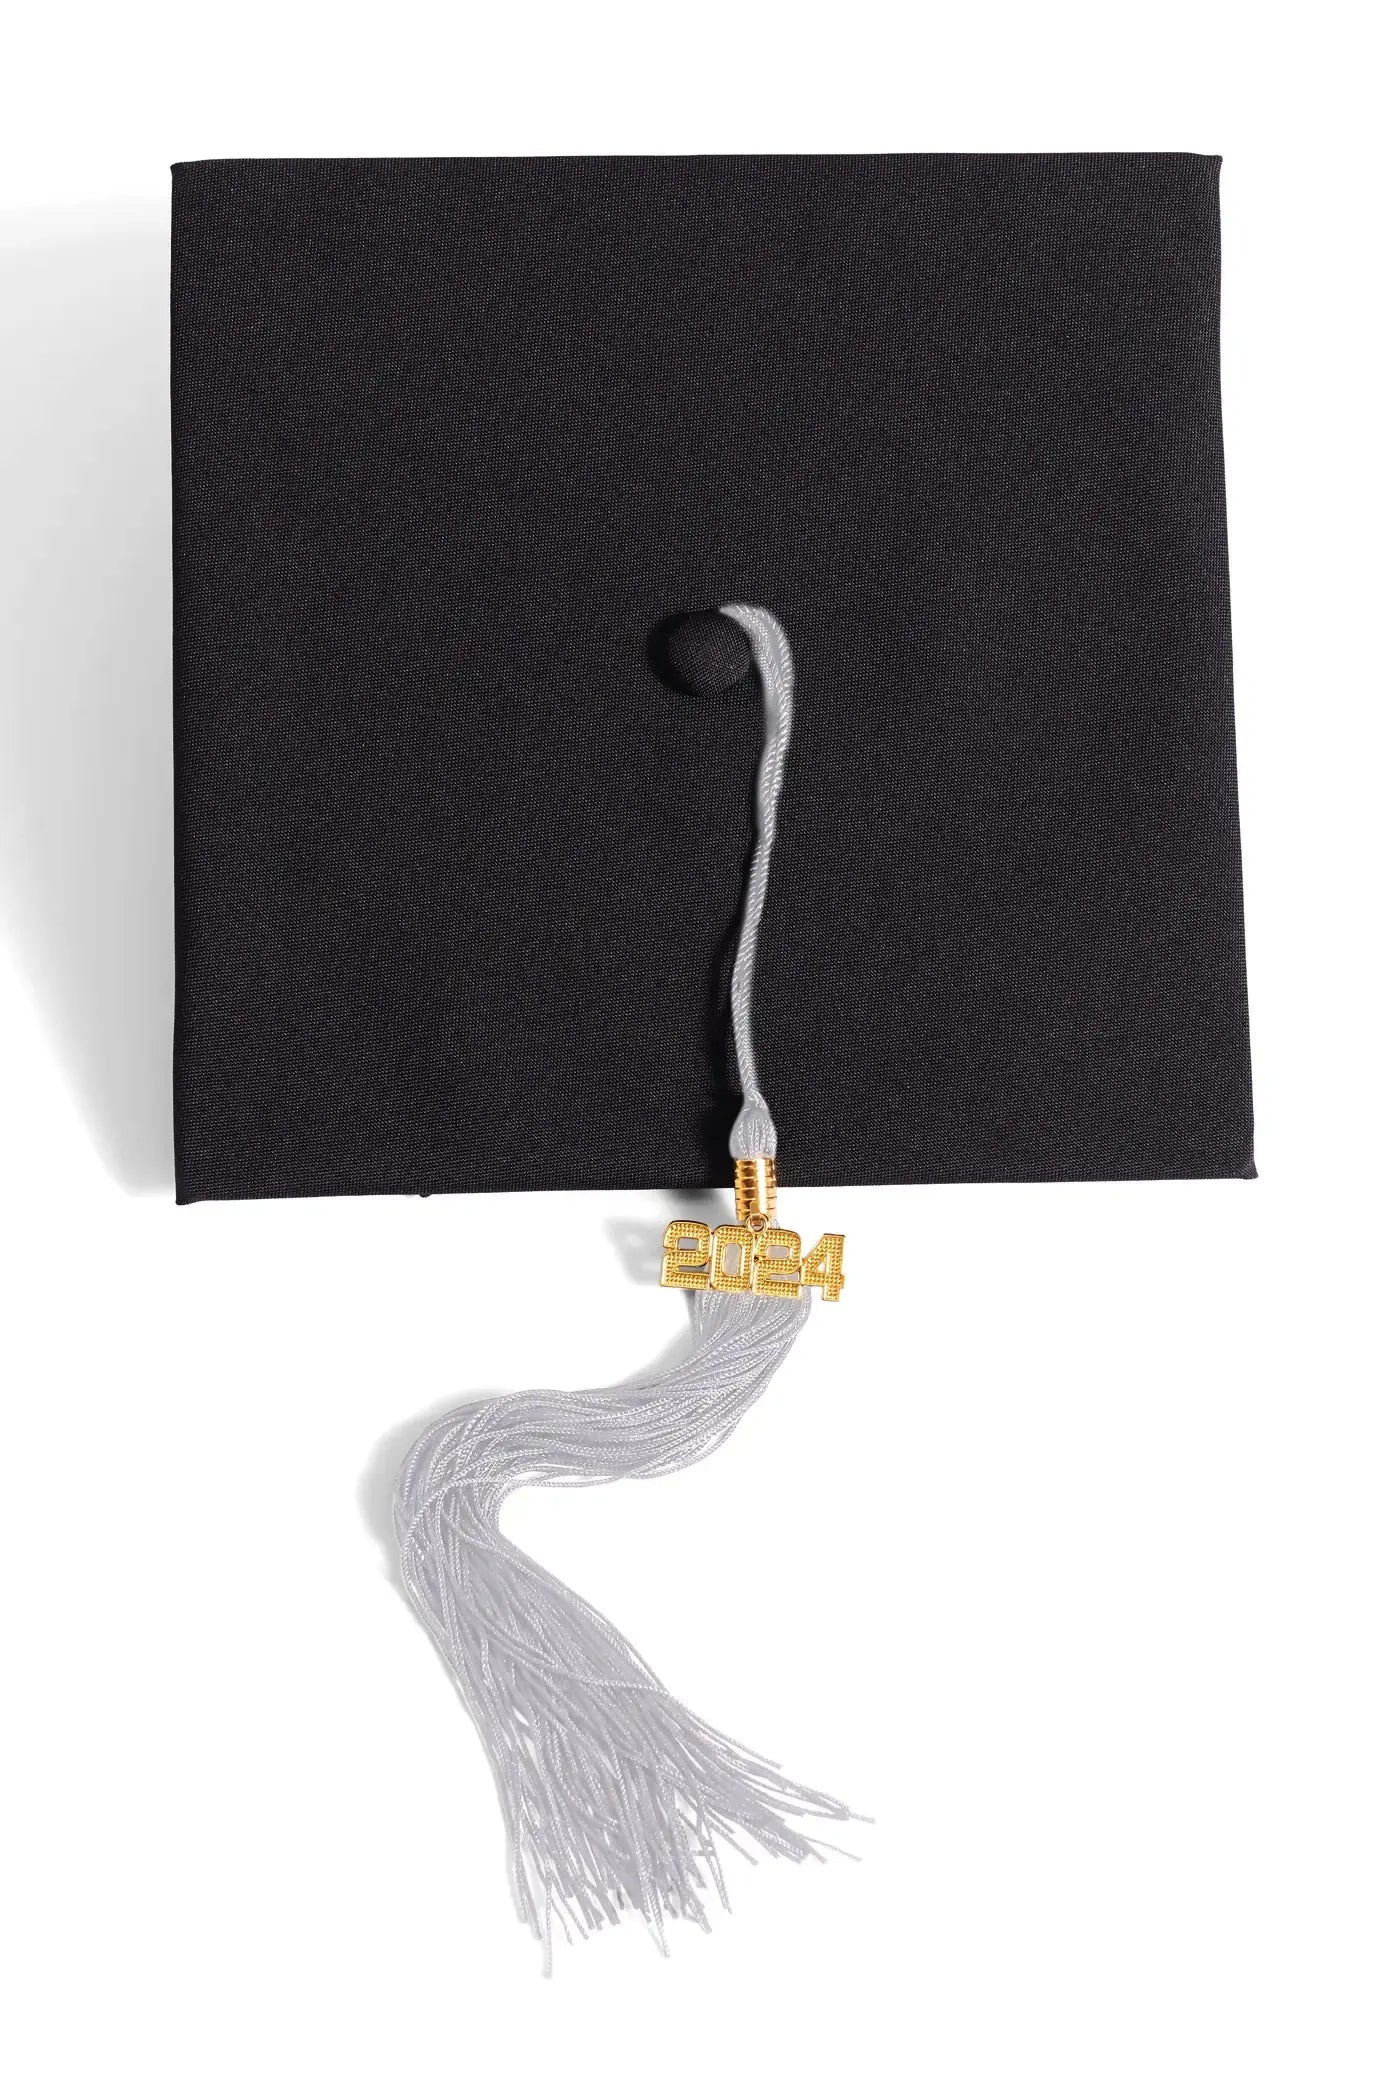 Bachelor's Degree Cap & Gown Set for Iowa State University